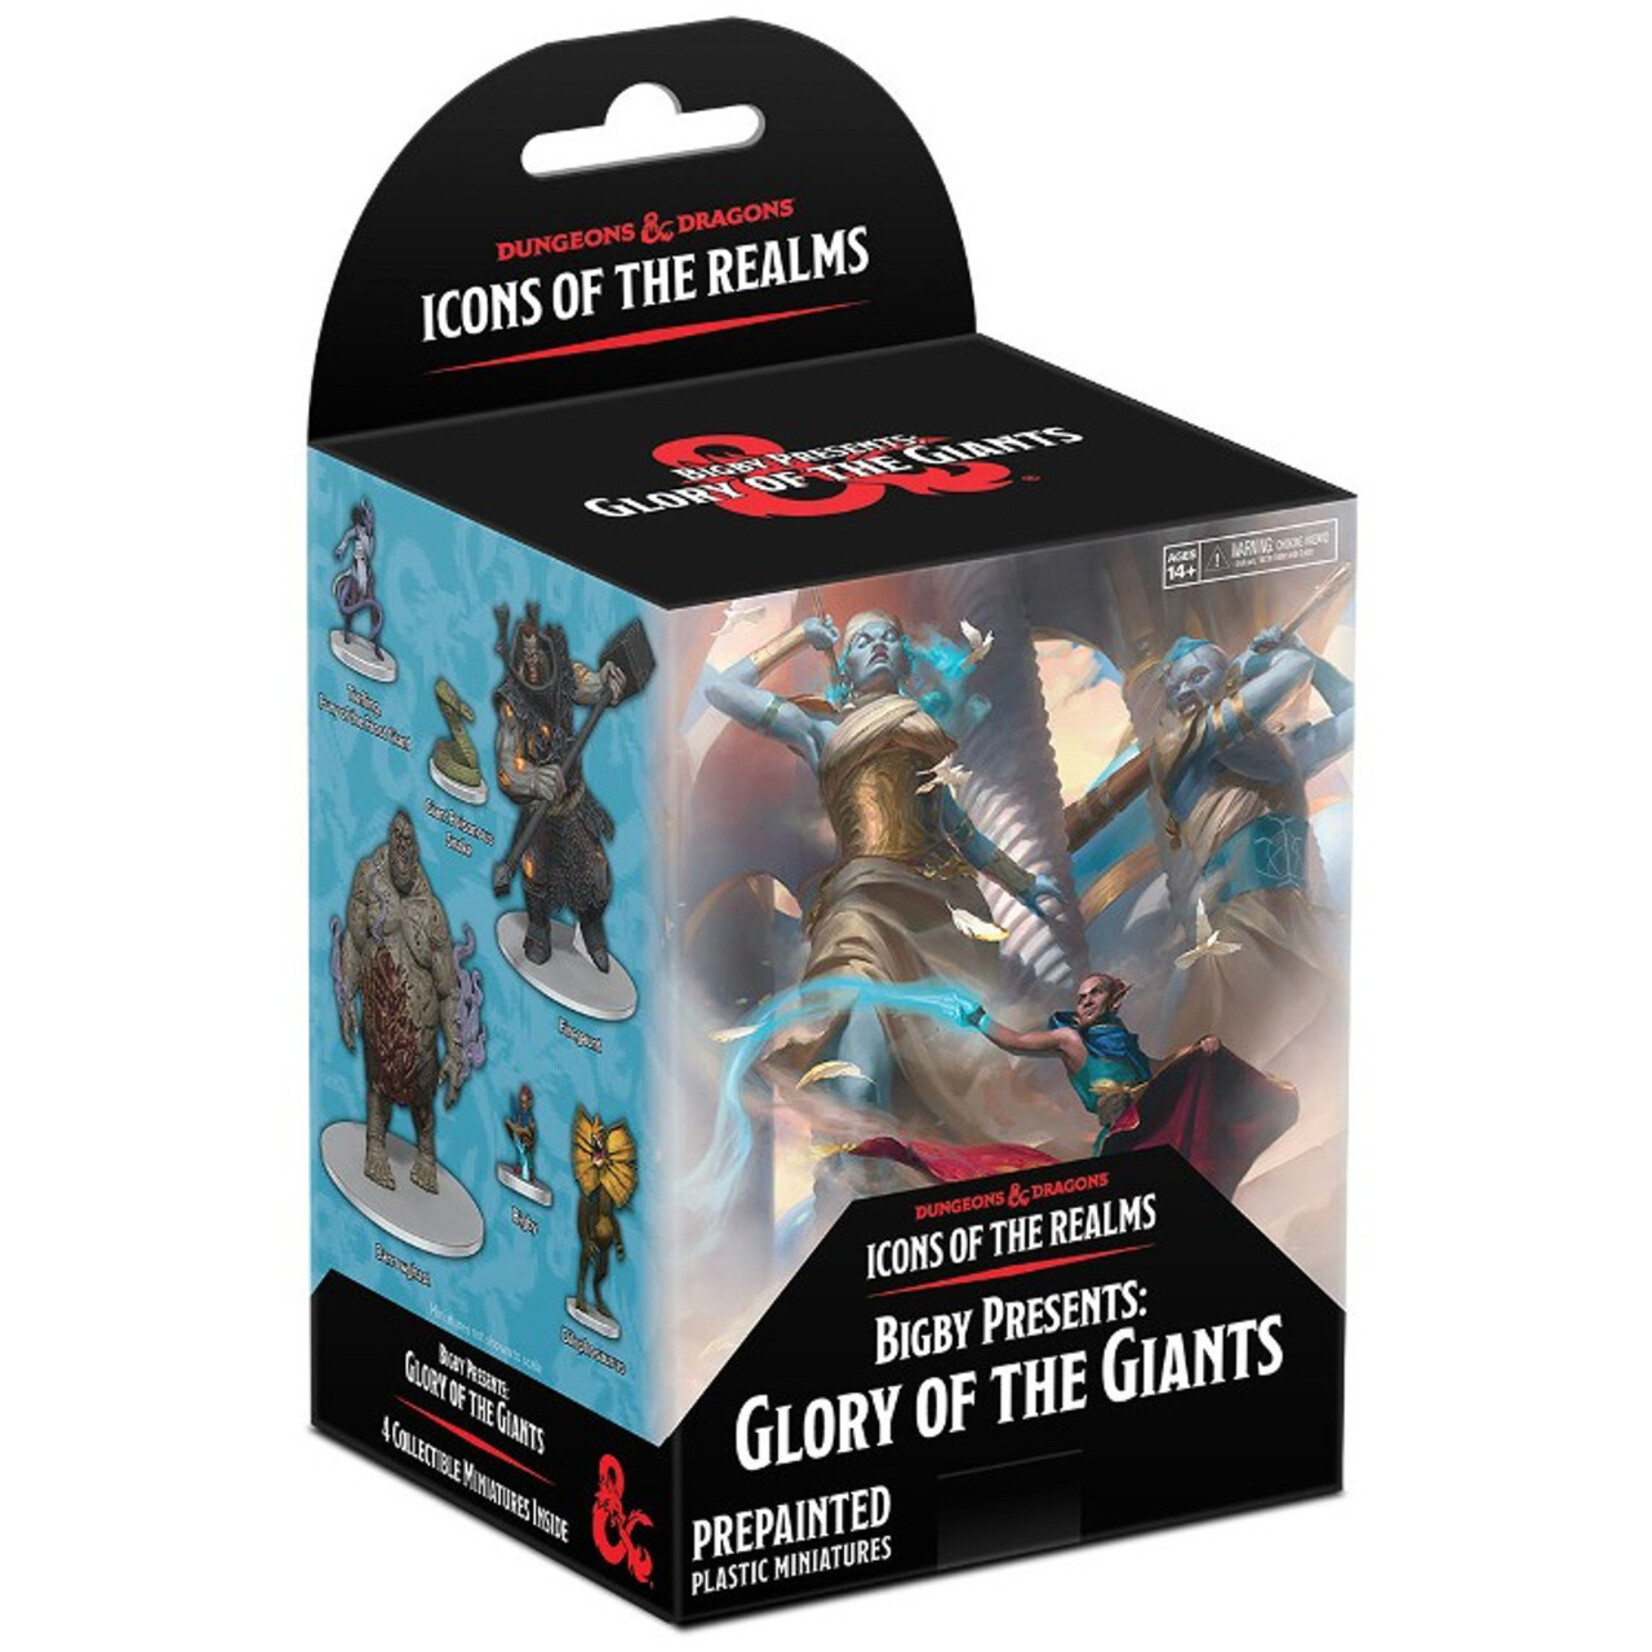 WizKids/Neca Bigby Presents: Glory of the Giants Set 27 Icons of the Realms Booster Box